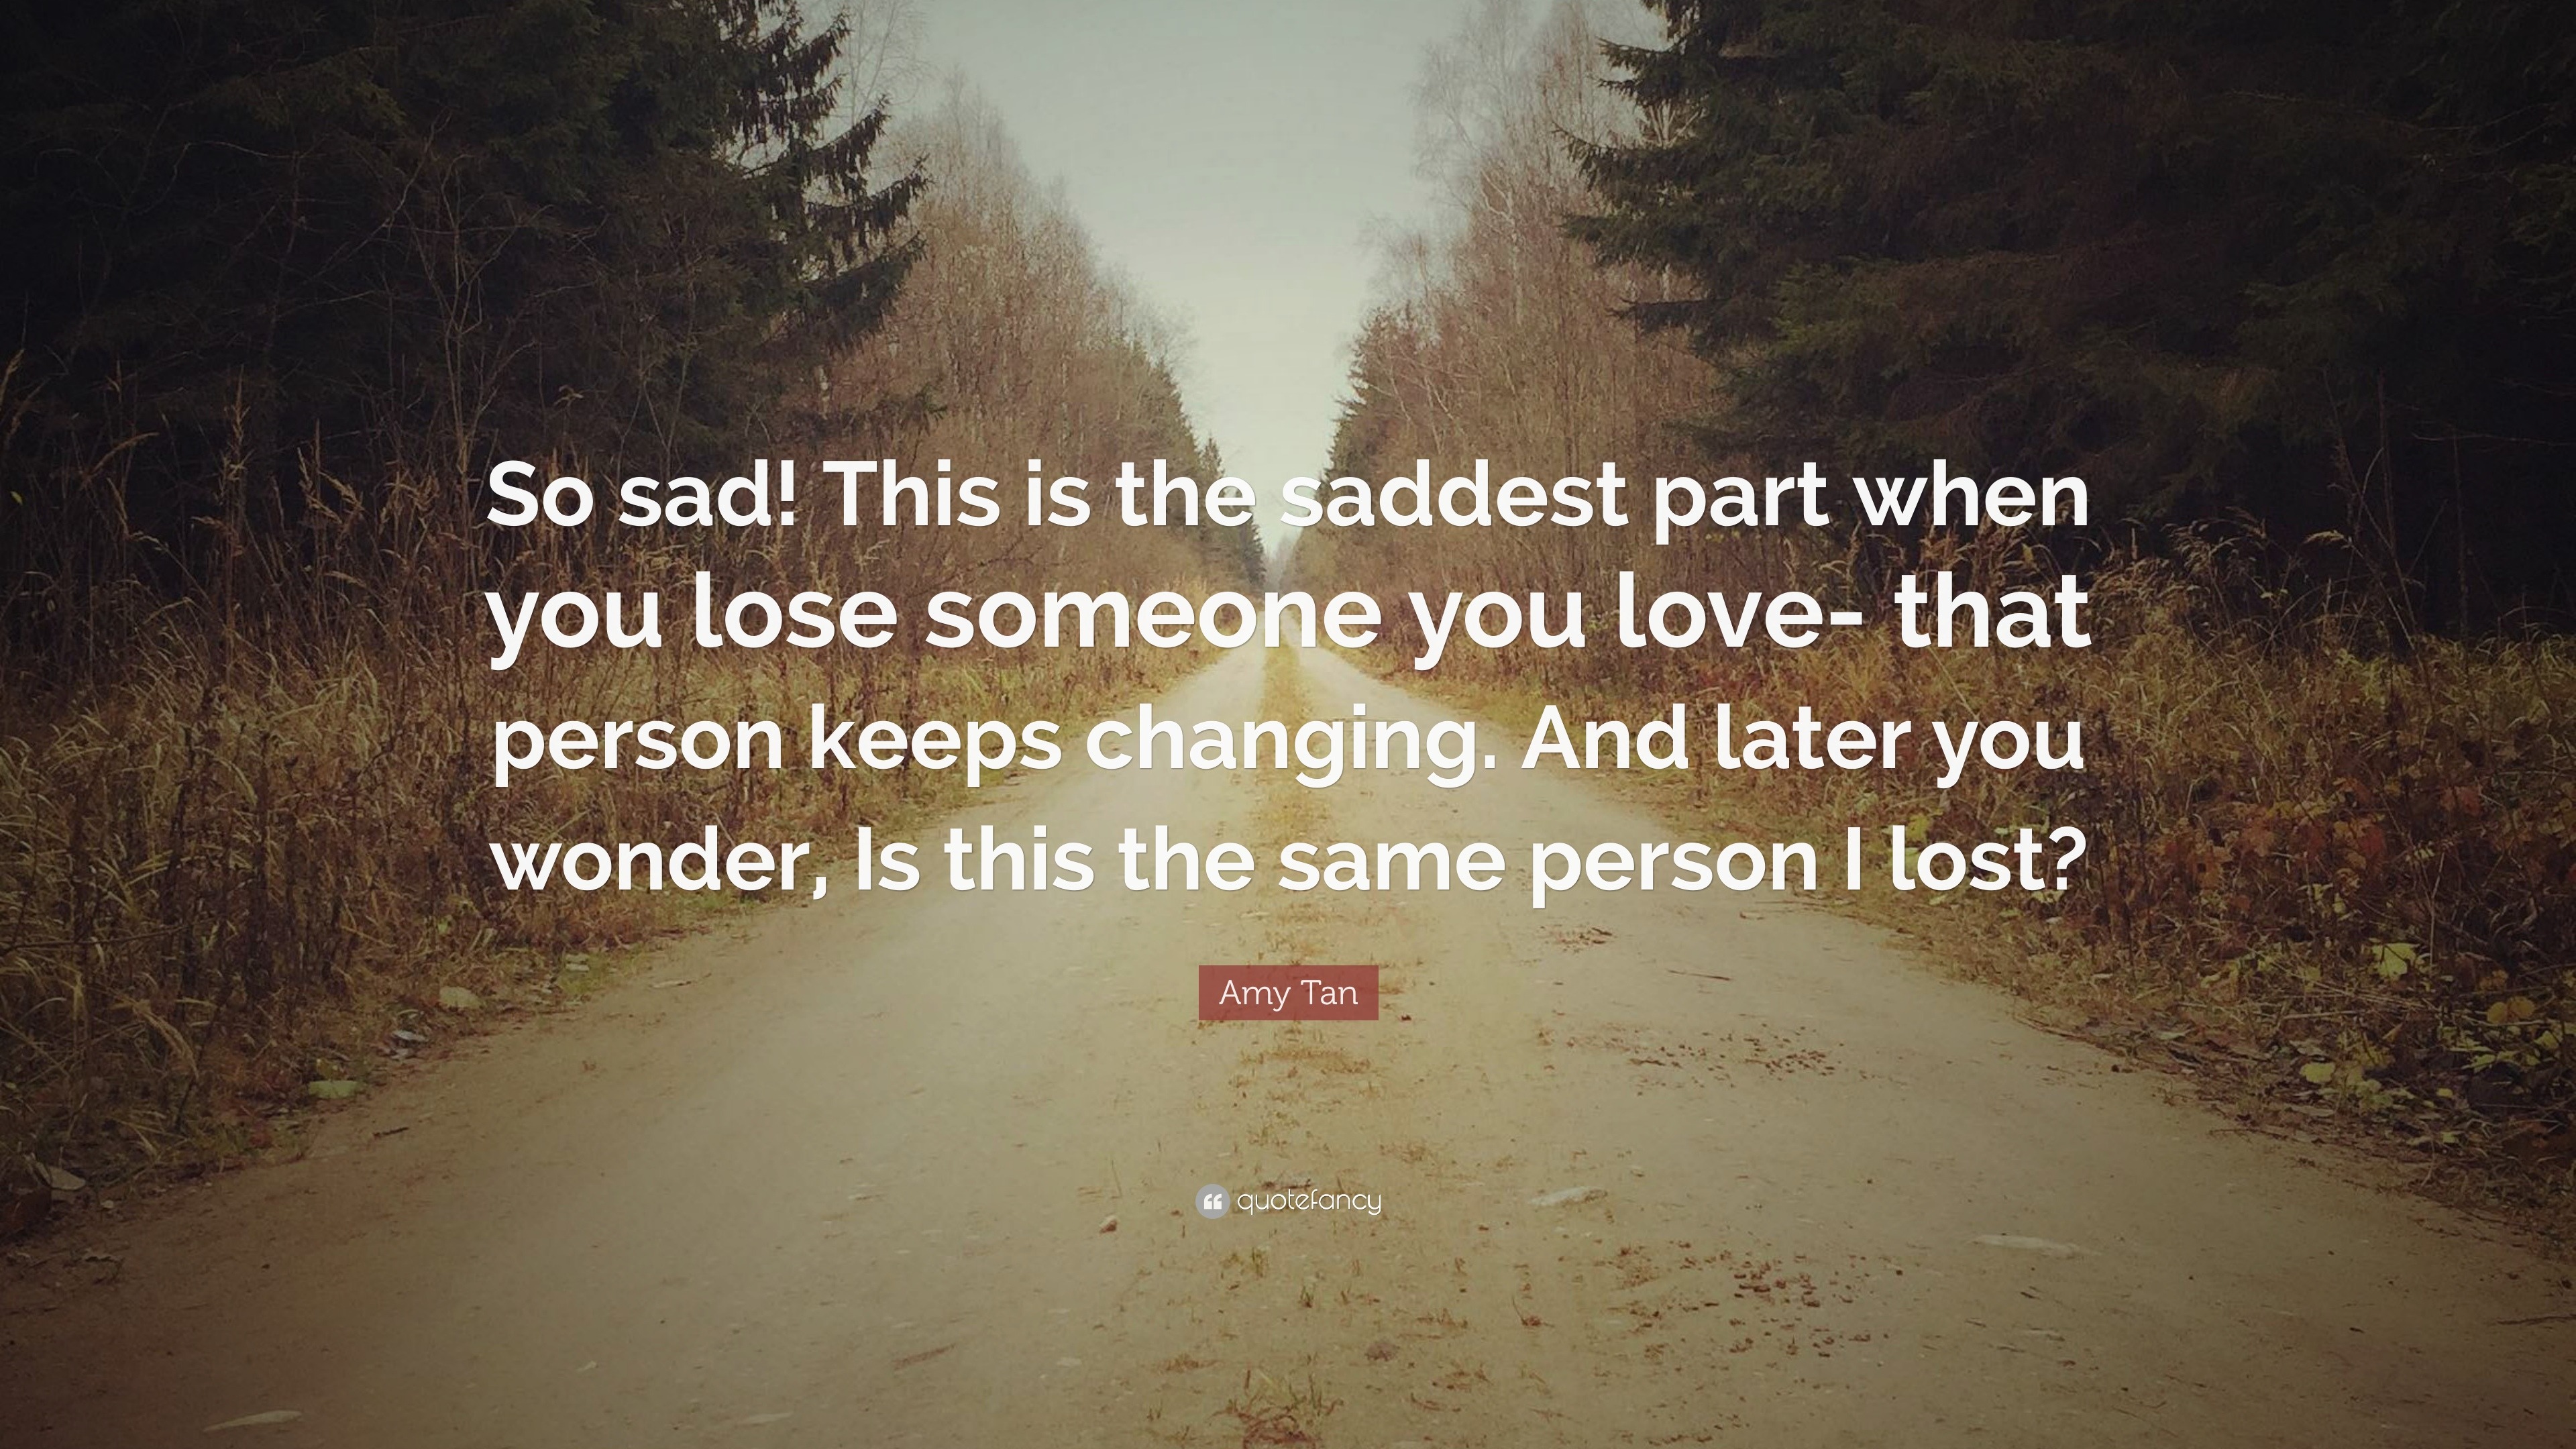 Amy Tan Quote “So sad This is the saddest part when you lose